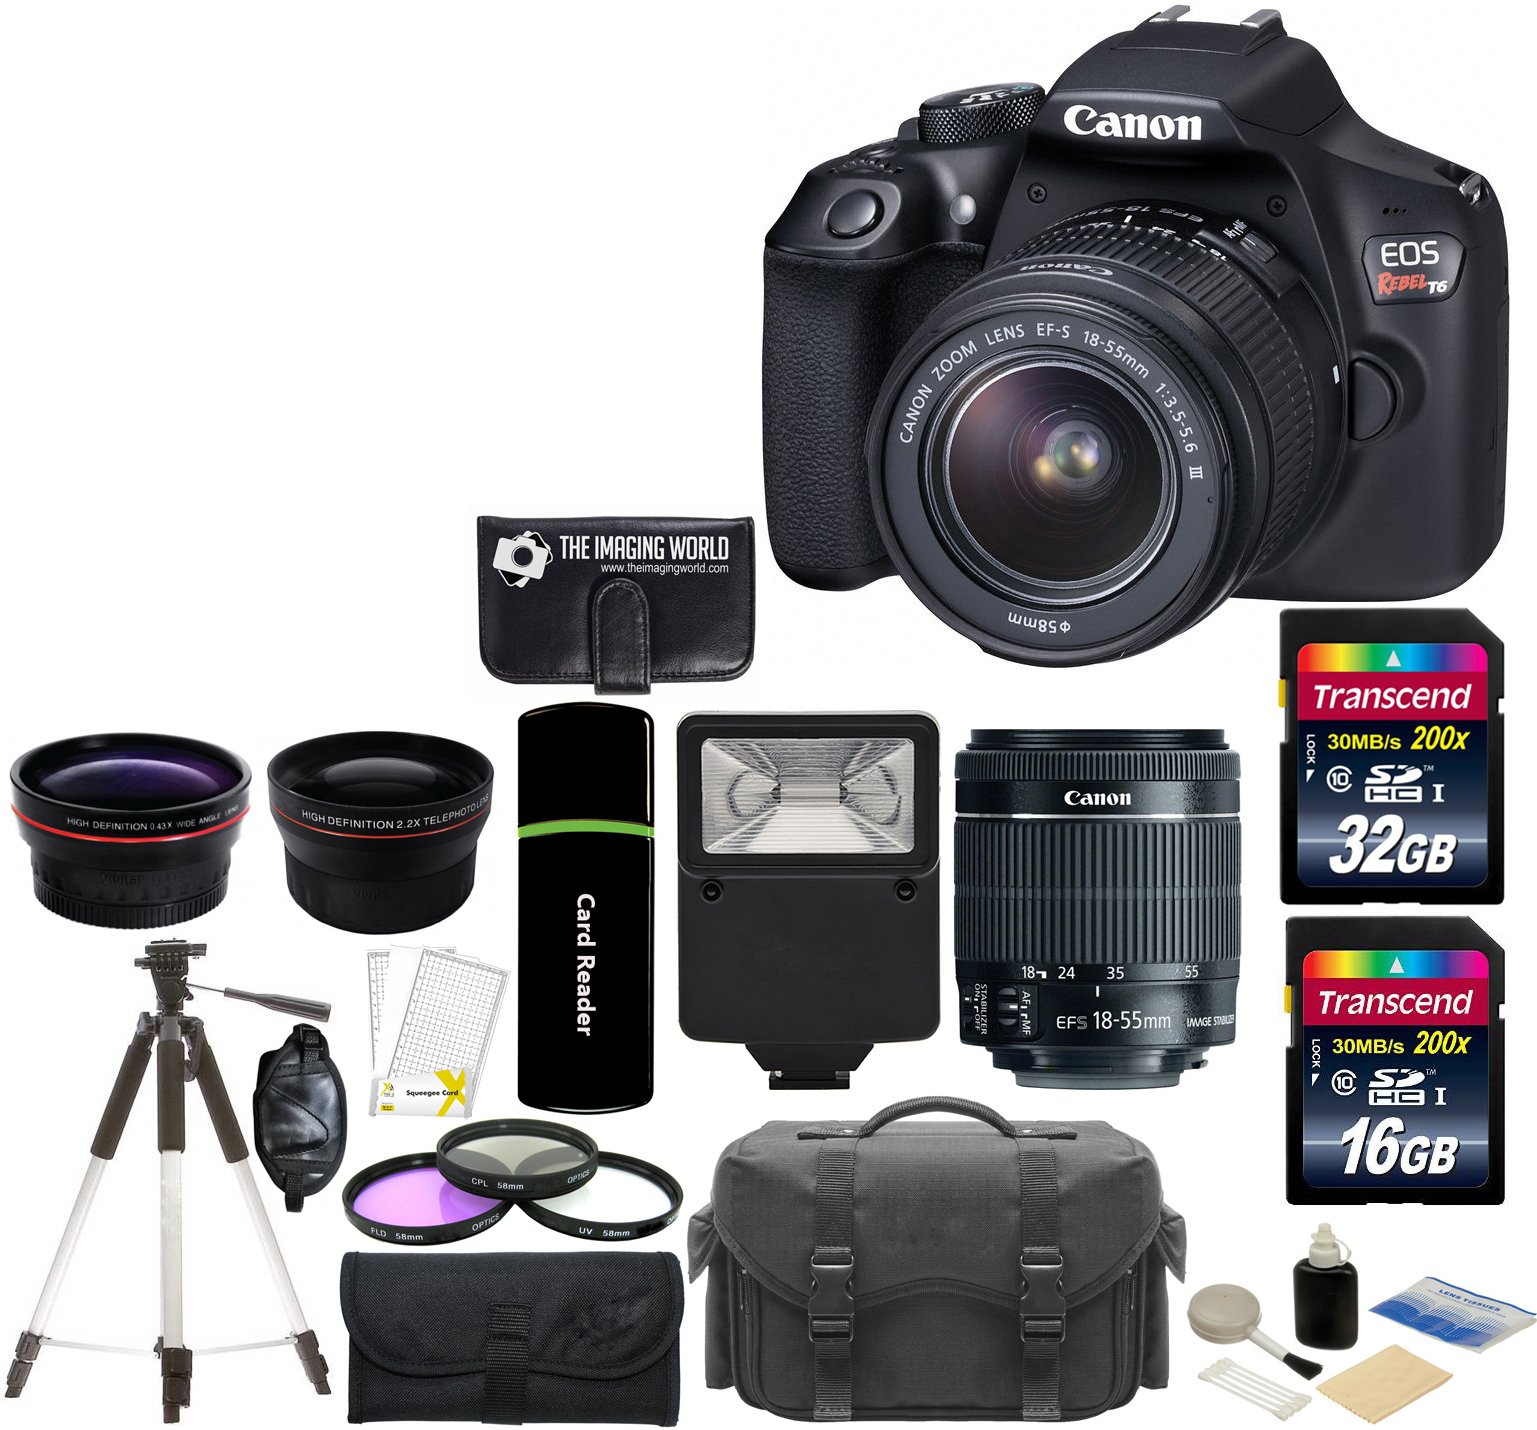 Canon EOS Rebel T6 18MP Wi-Fi DSLR Camera with 18-55mm IS II Lens + 32GB & 16GB Card + Wide Angle Lens + Telephoto Lens + Flash + Grip + Tripod - 48GB Deluxe Accessories Bundle